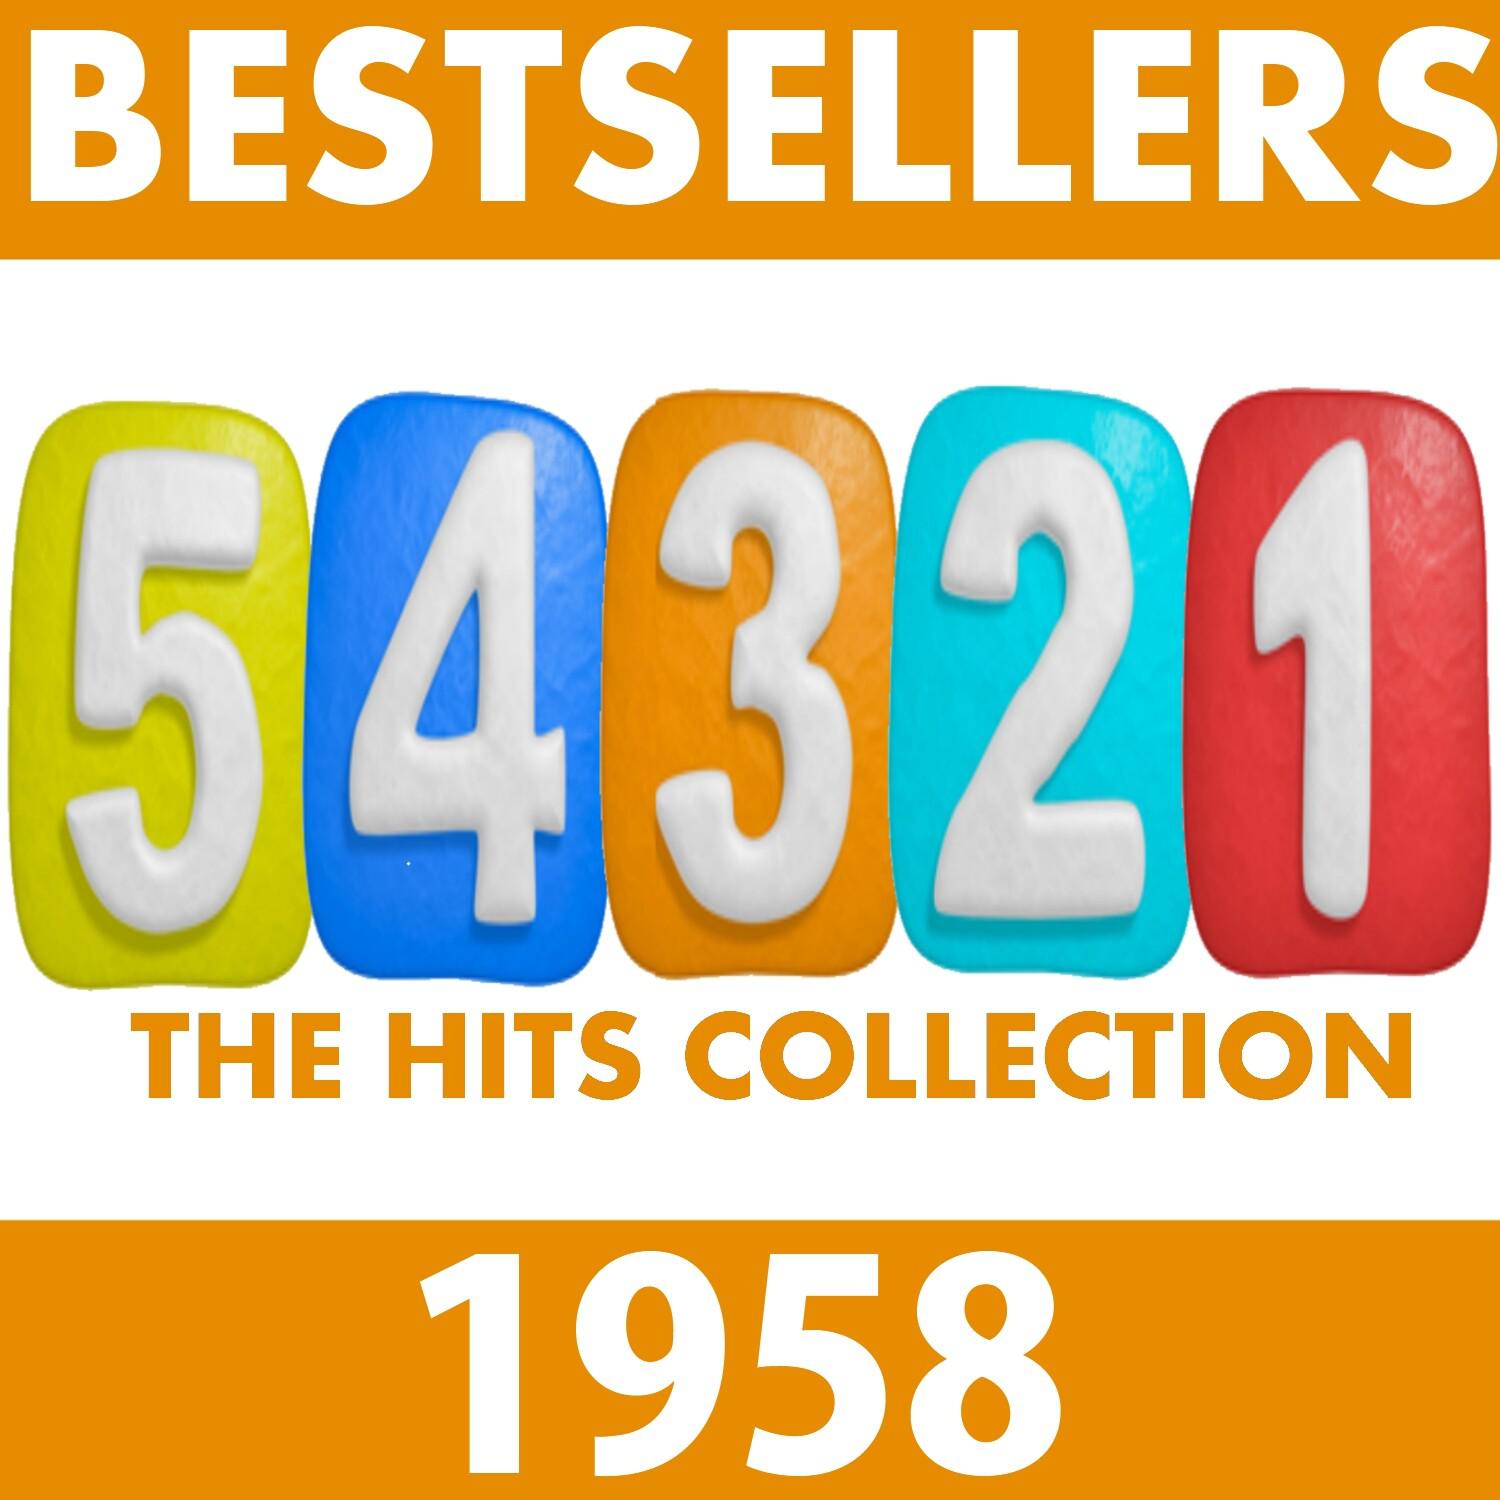 54321! - The Best Selling Hits of 1958 - 118 Classic Tracks